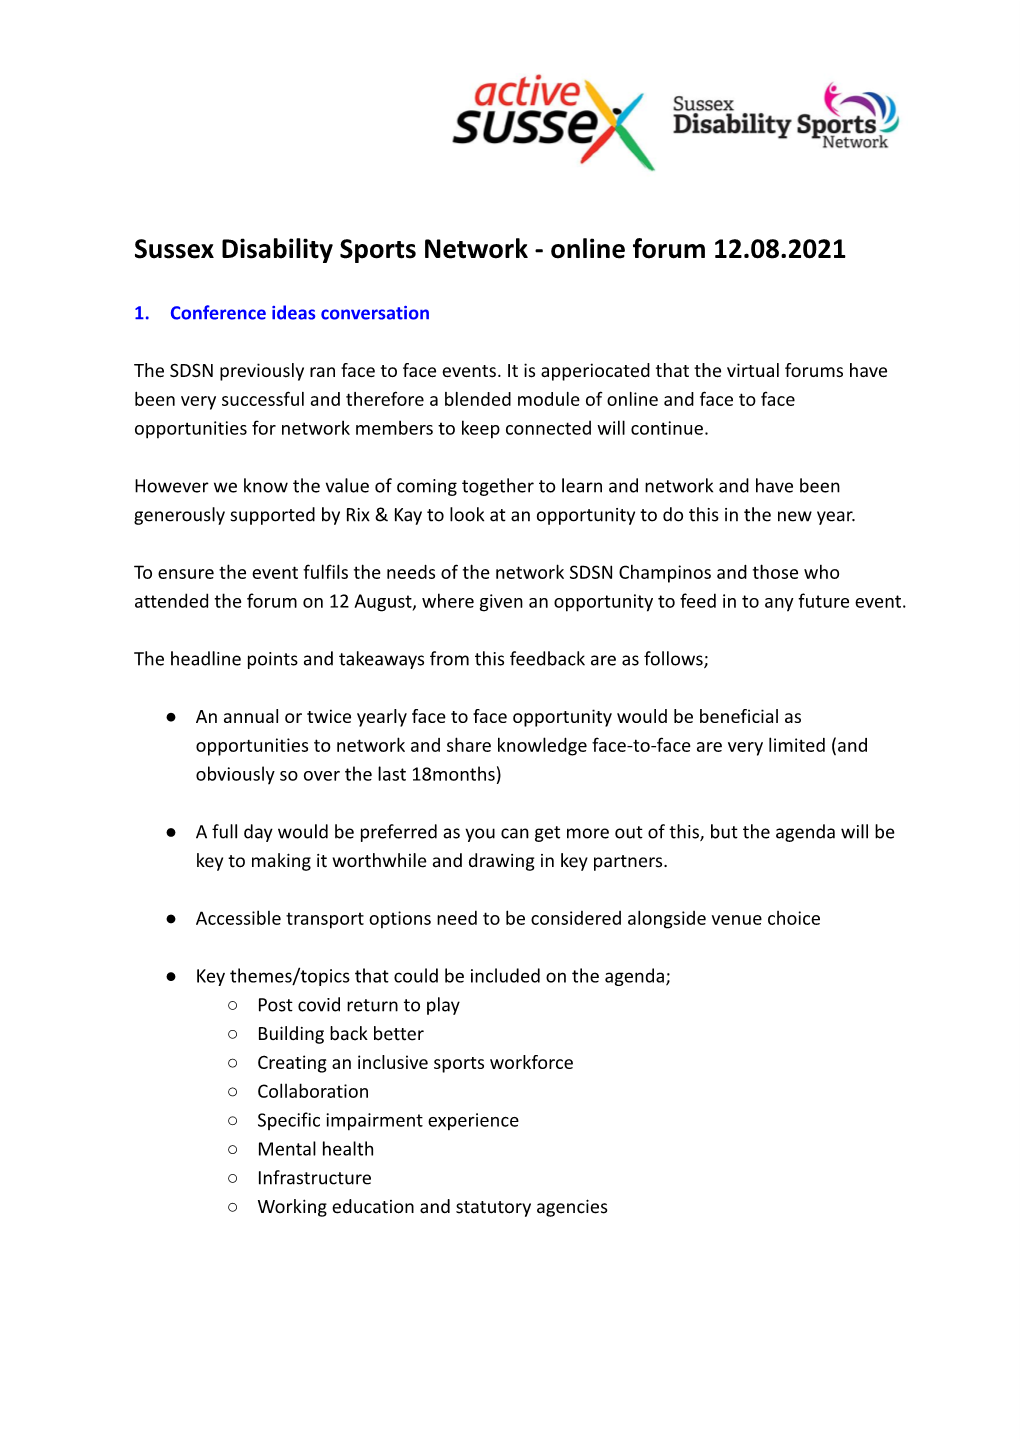 Sussex Disability Sports Network - Online Forum 12.08.2021